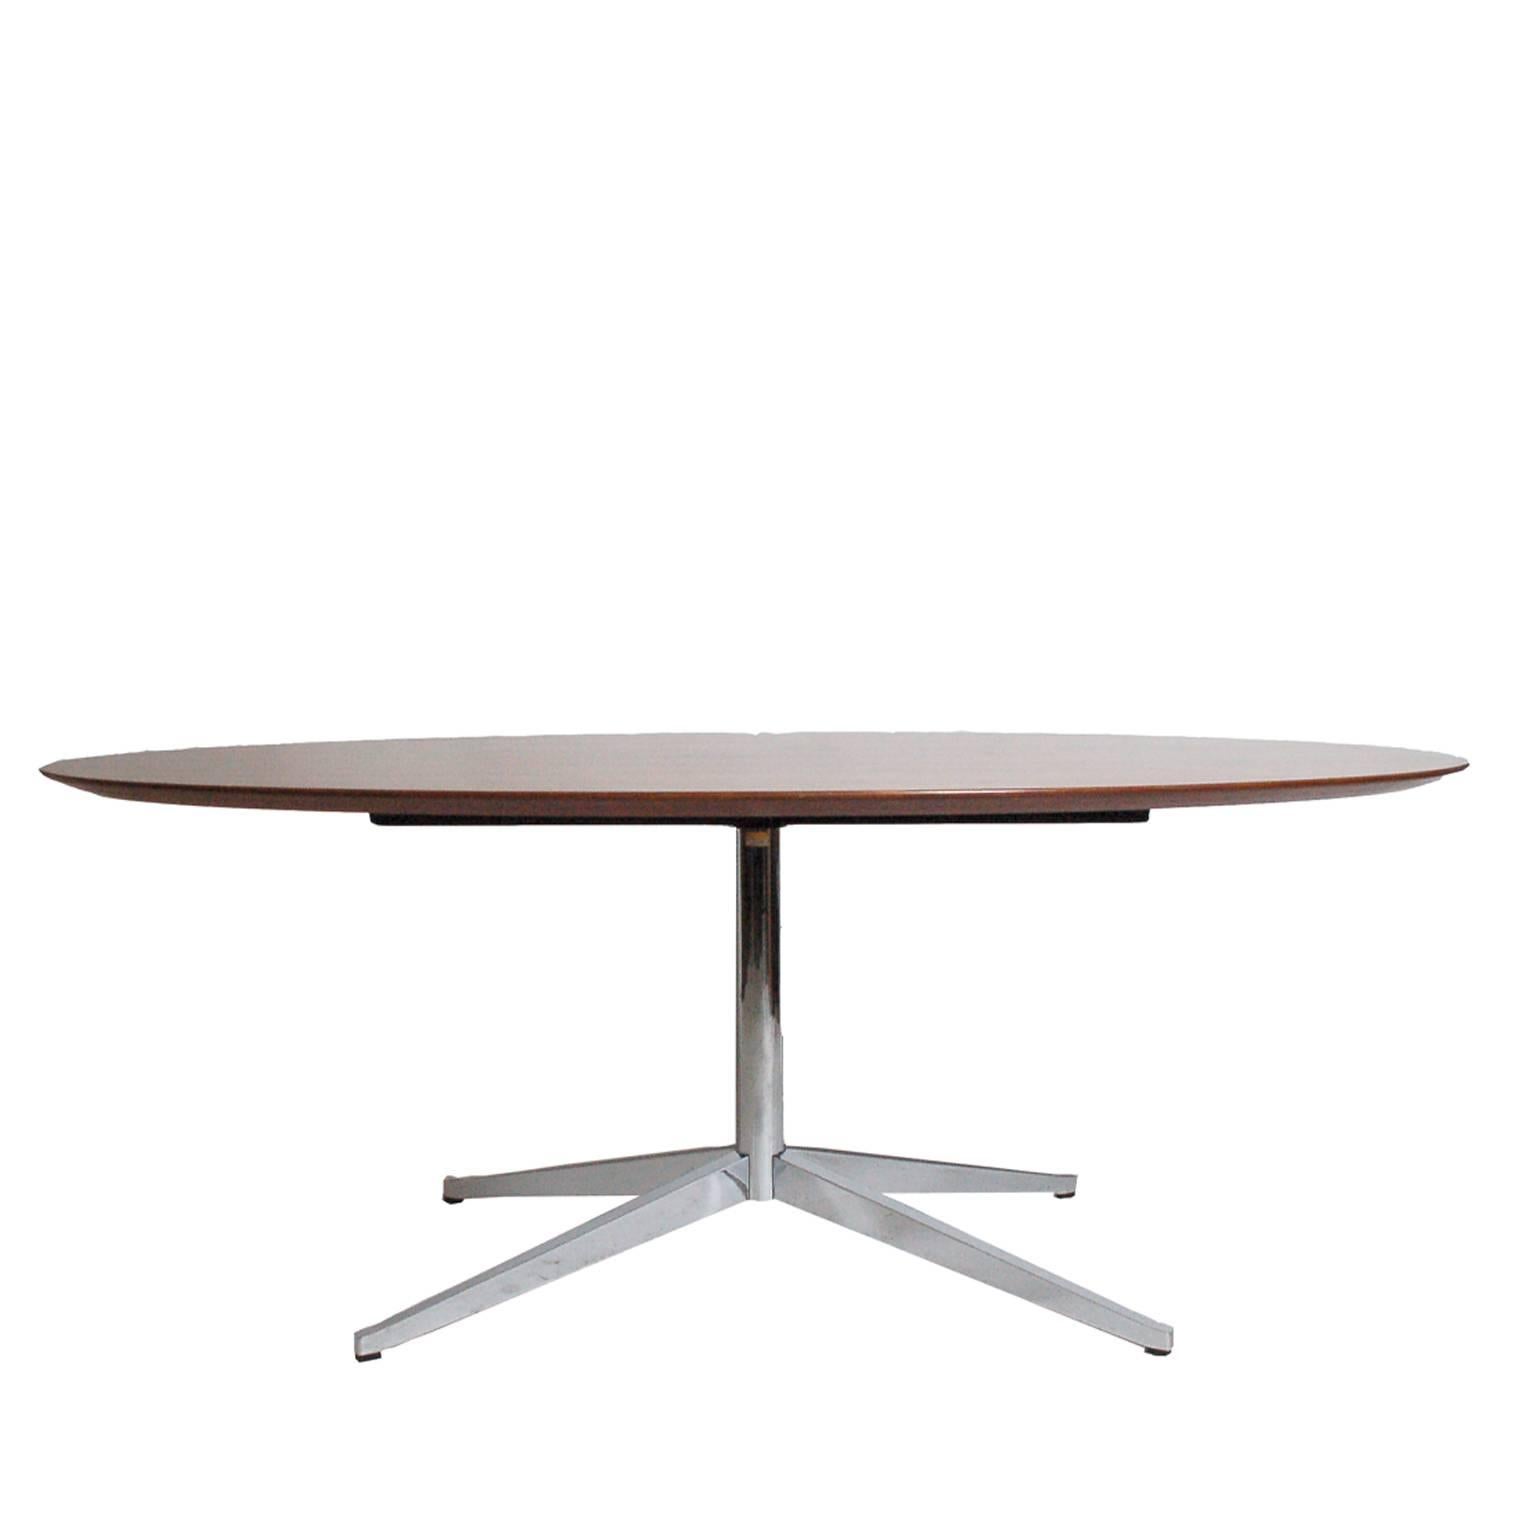 Beautifully grained rosewood top on polished chrome steel four prong pedestal base. Use as table or writing desk. Manufactured by Knoll.